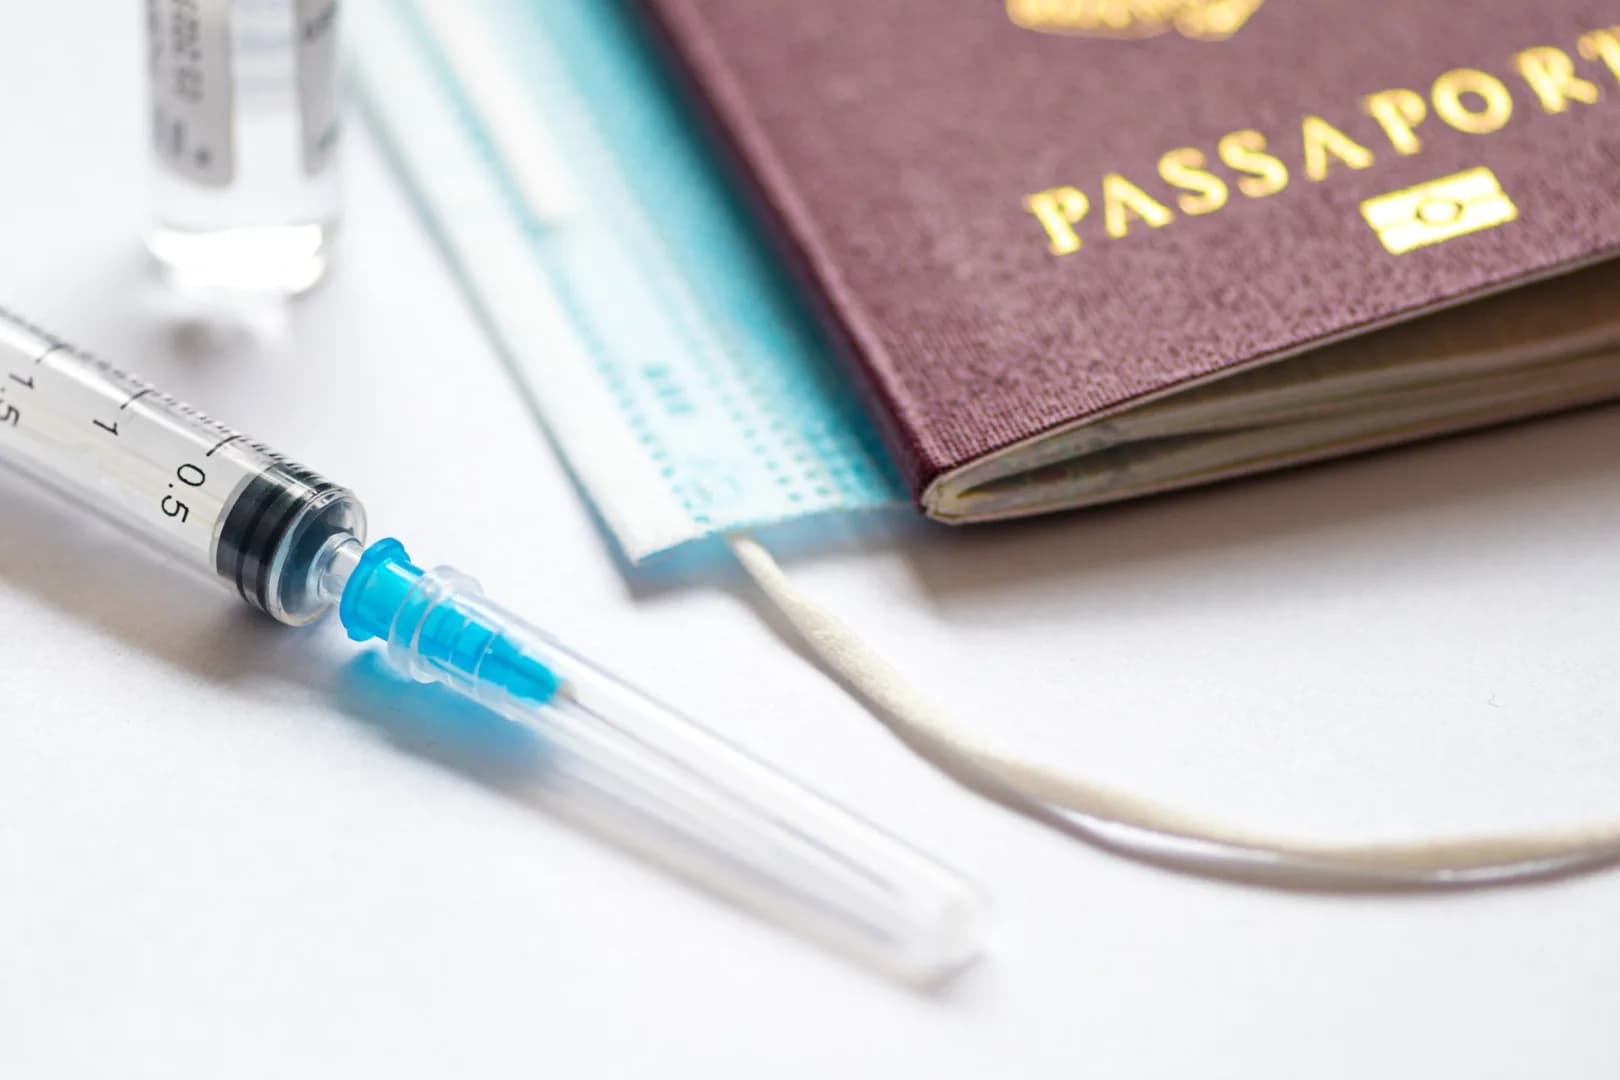 Transitioning from Vaccine Passports to Everything Passports